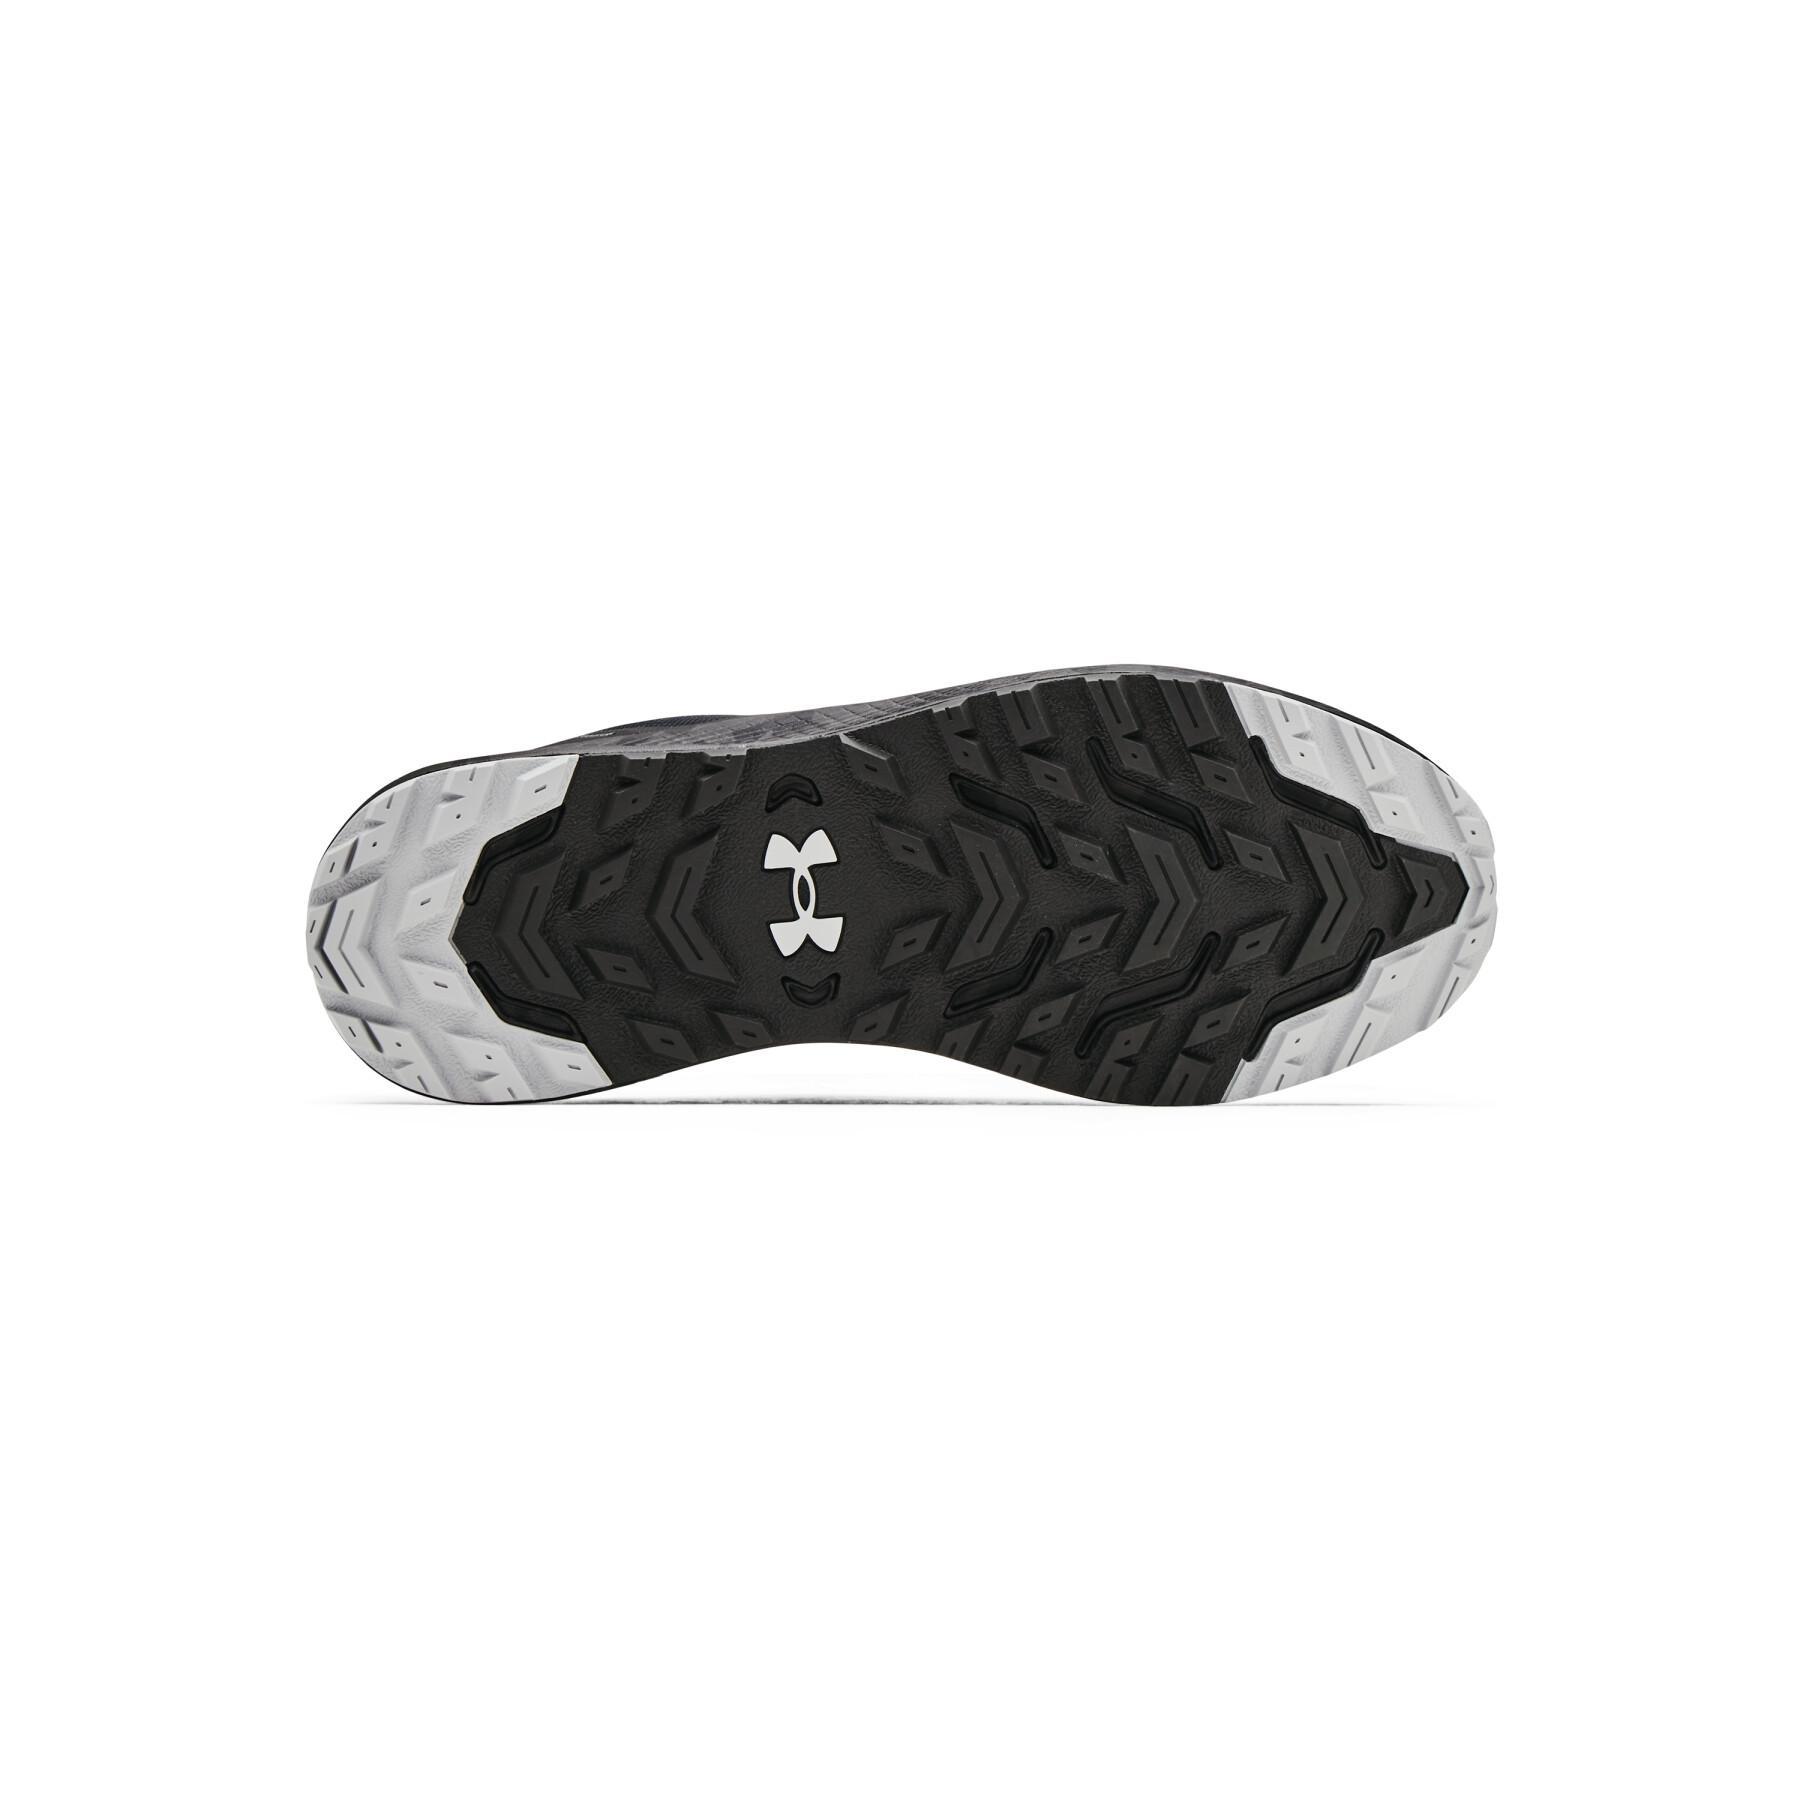 Chaussures de running de course Under Armour Charged Bandit TR 2